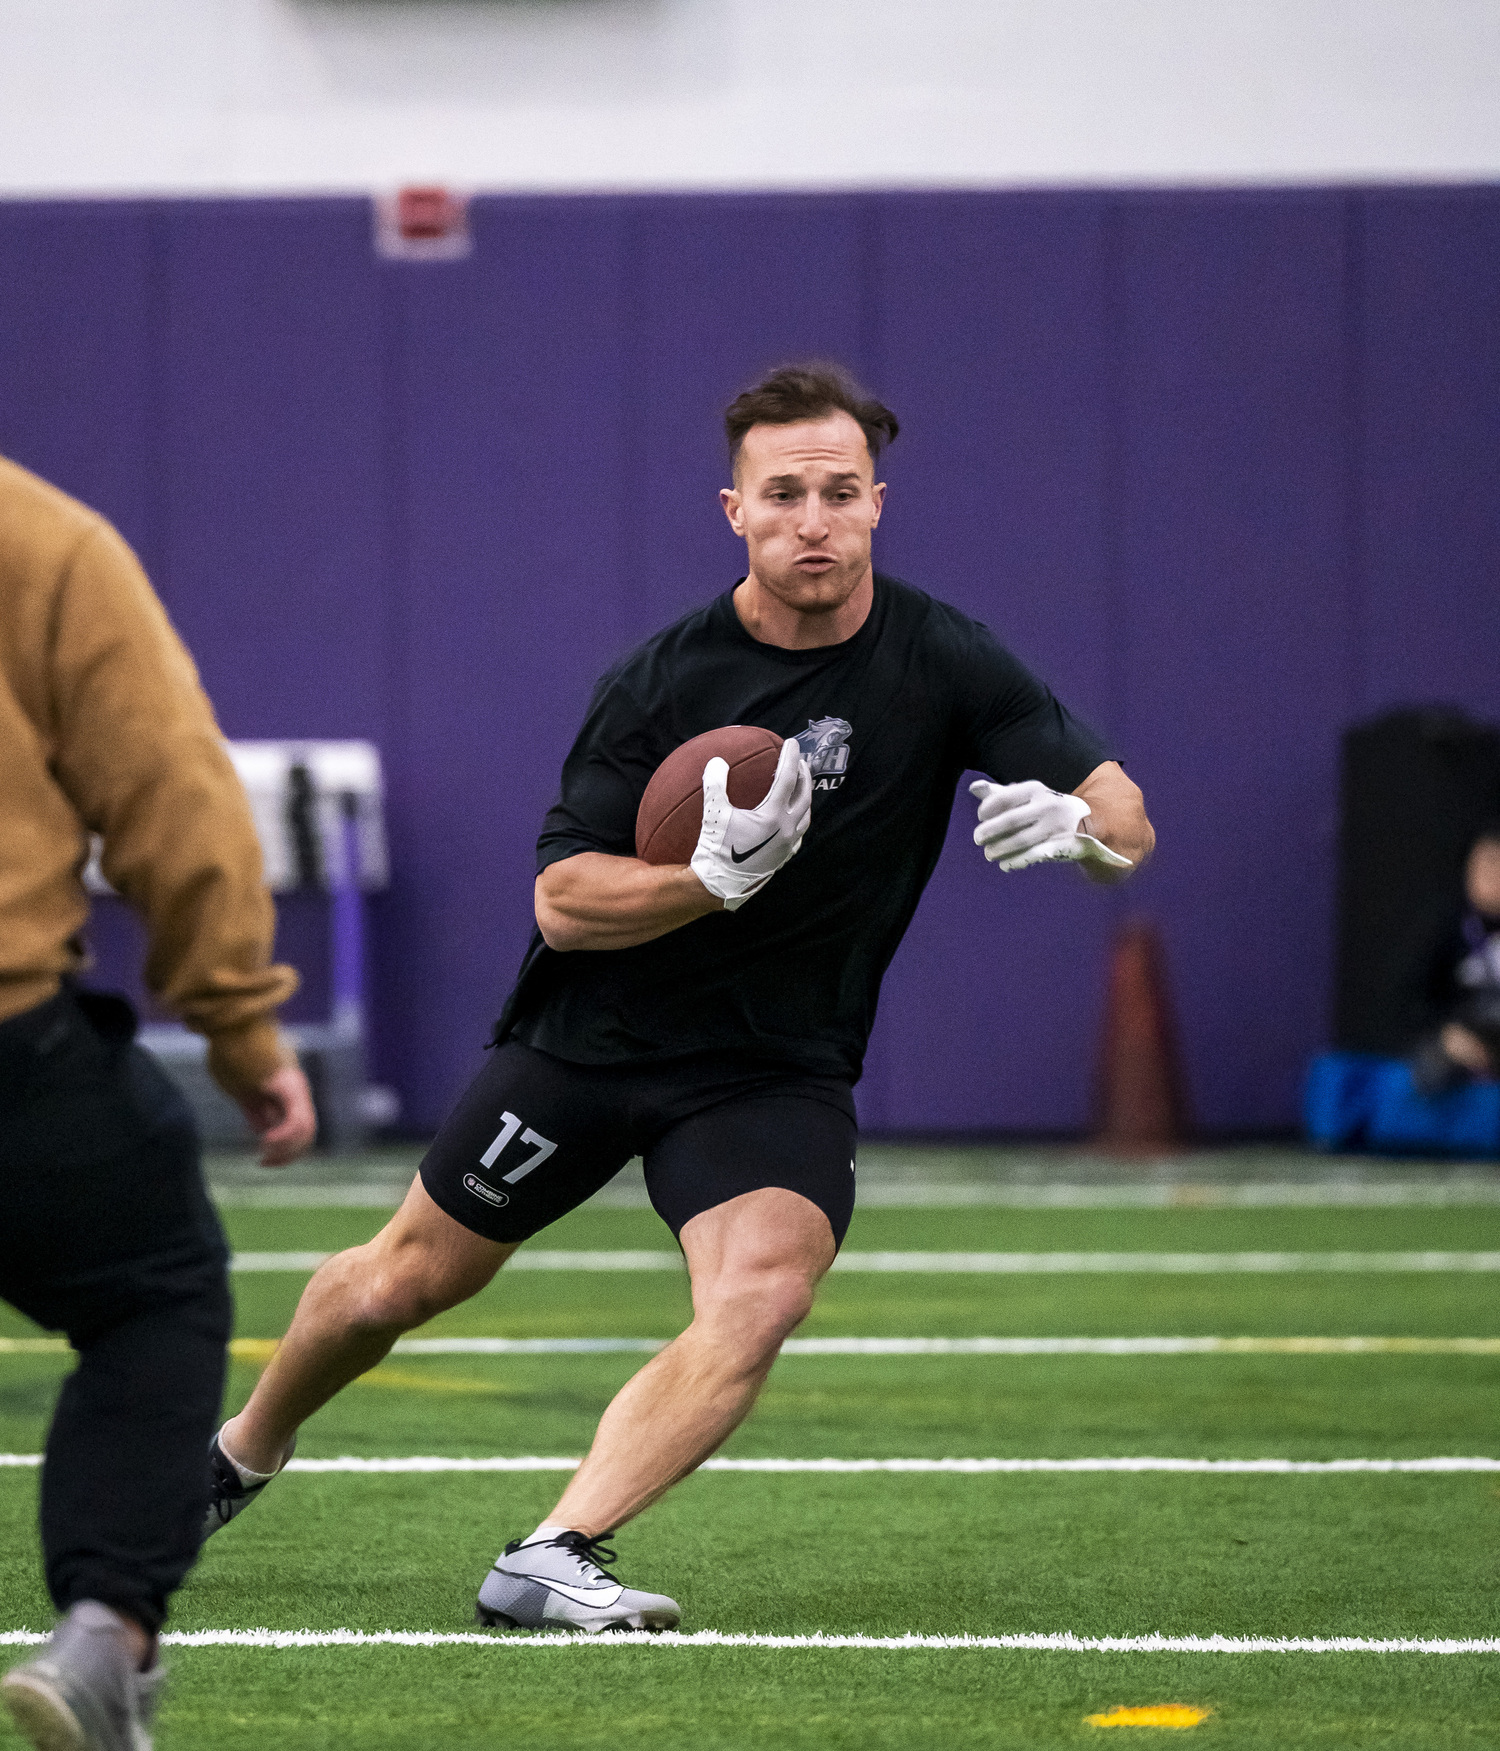 Westhampton Beach and soon-to-be University of New Hampshire graduate Dylan Laube performs drills during College of the Holy Cross's annual NFL Pro Day March 21. UNH Athletics/Patrick Donnelly